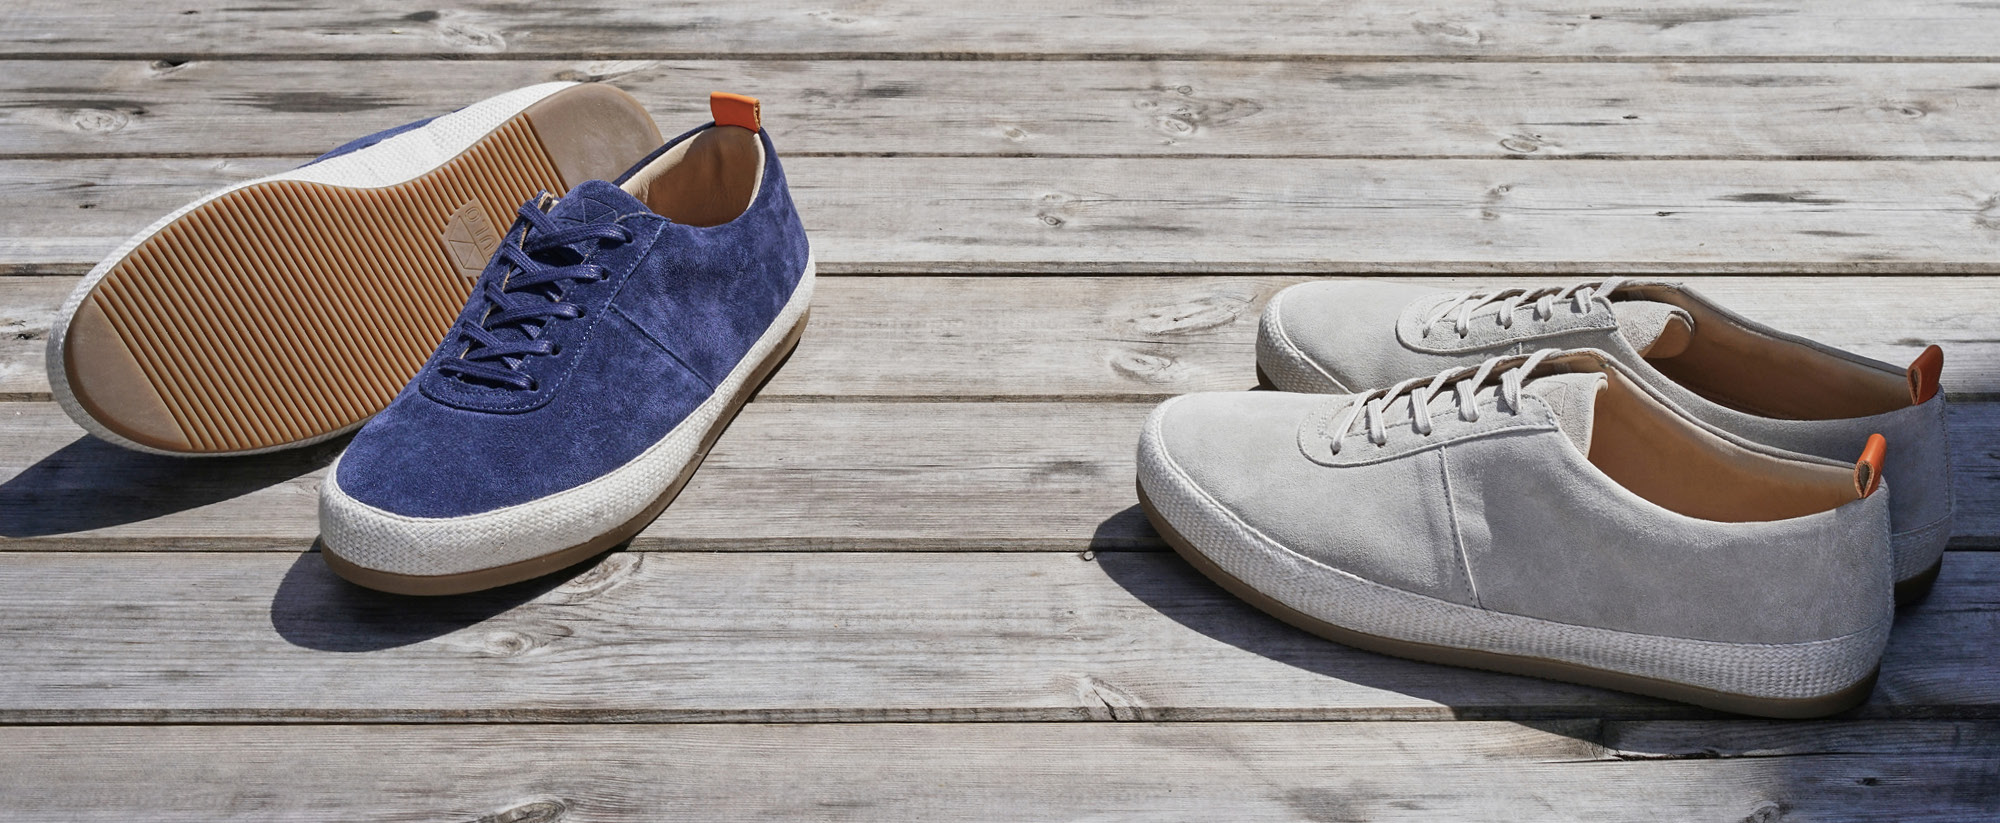 Mens Lace-Up Espadrilles in Suede